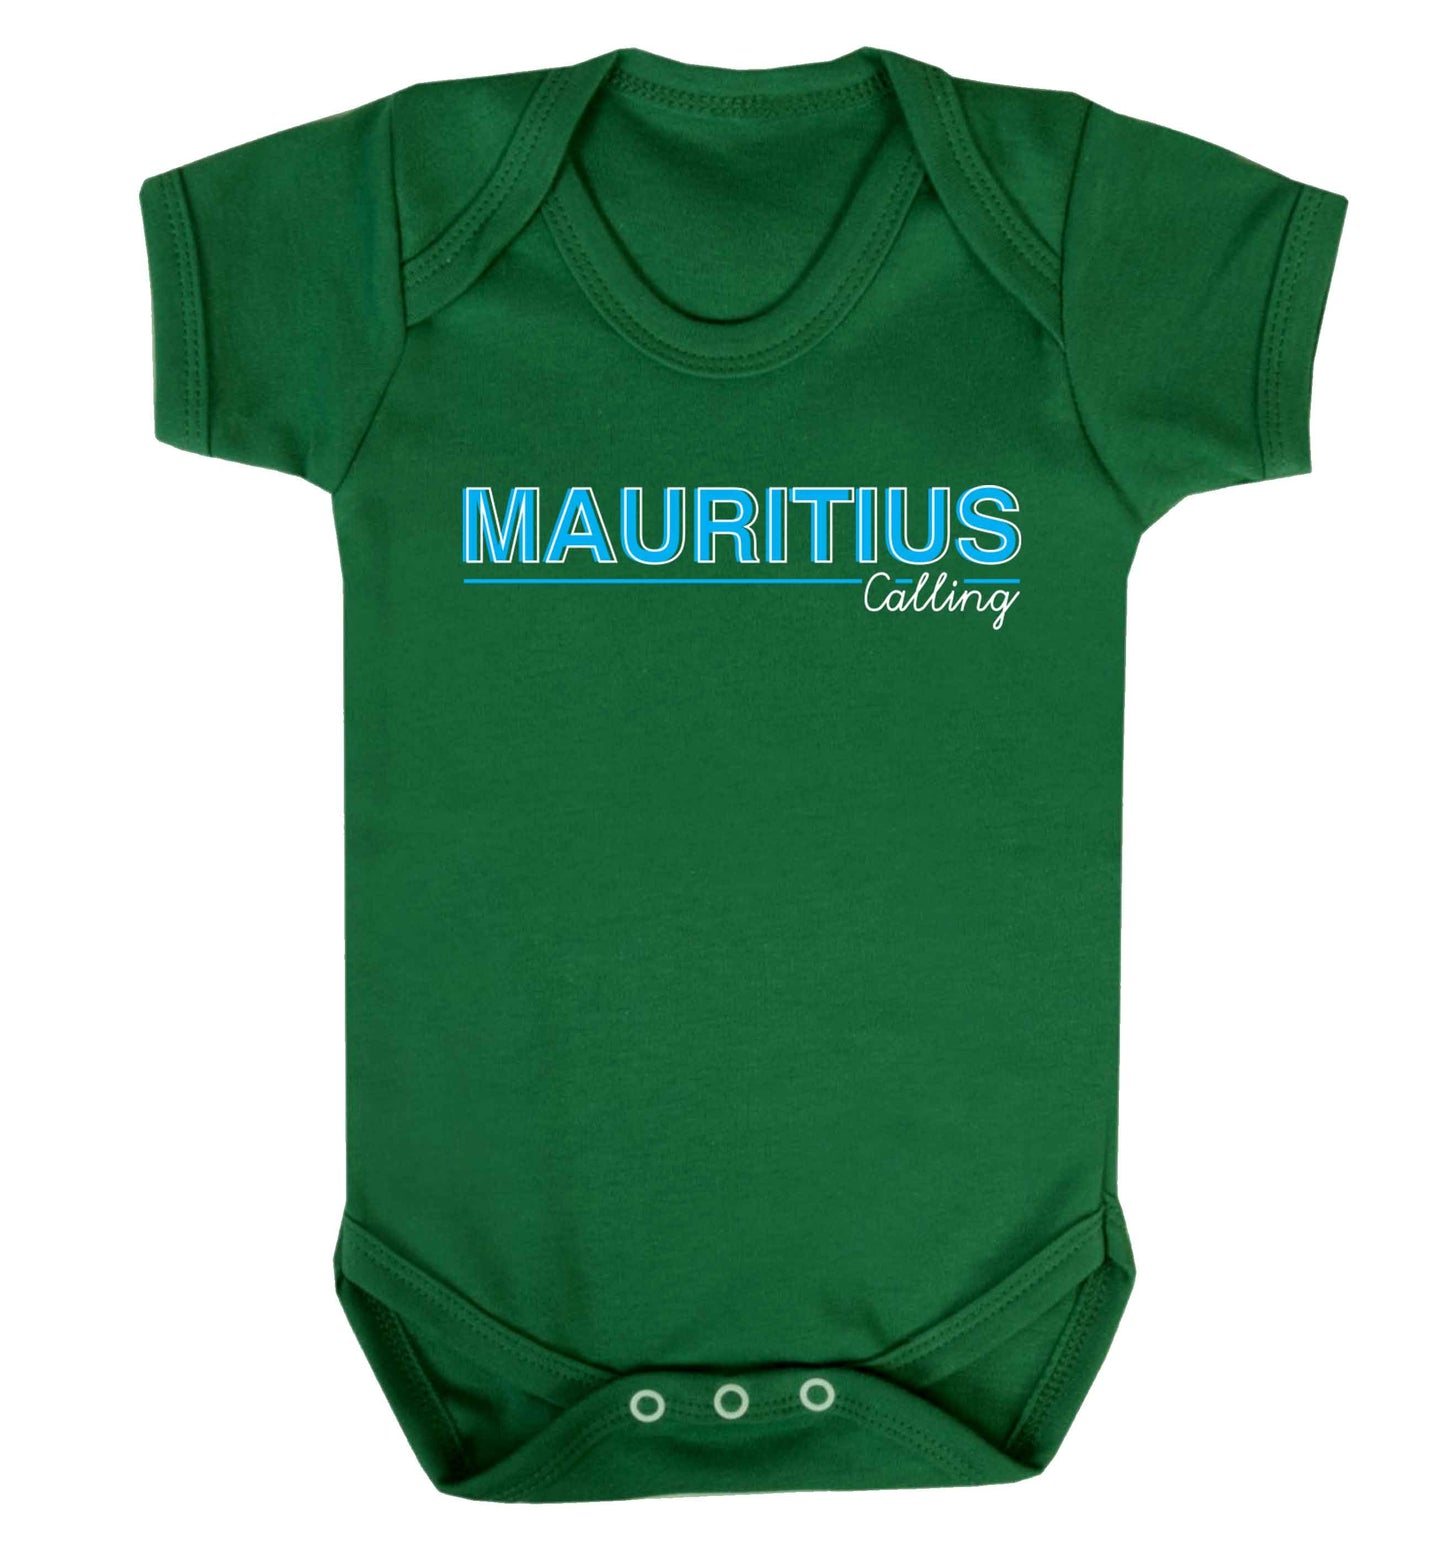 Mauritius calling Baby Vest green 18-24 months